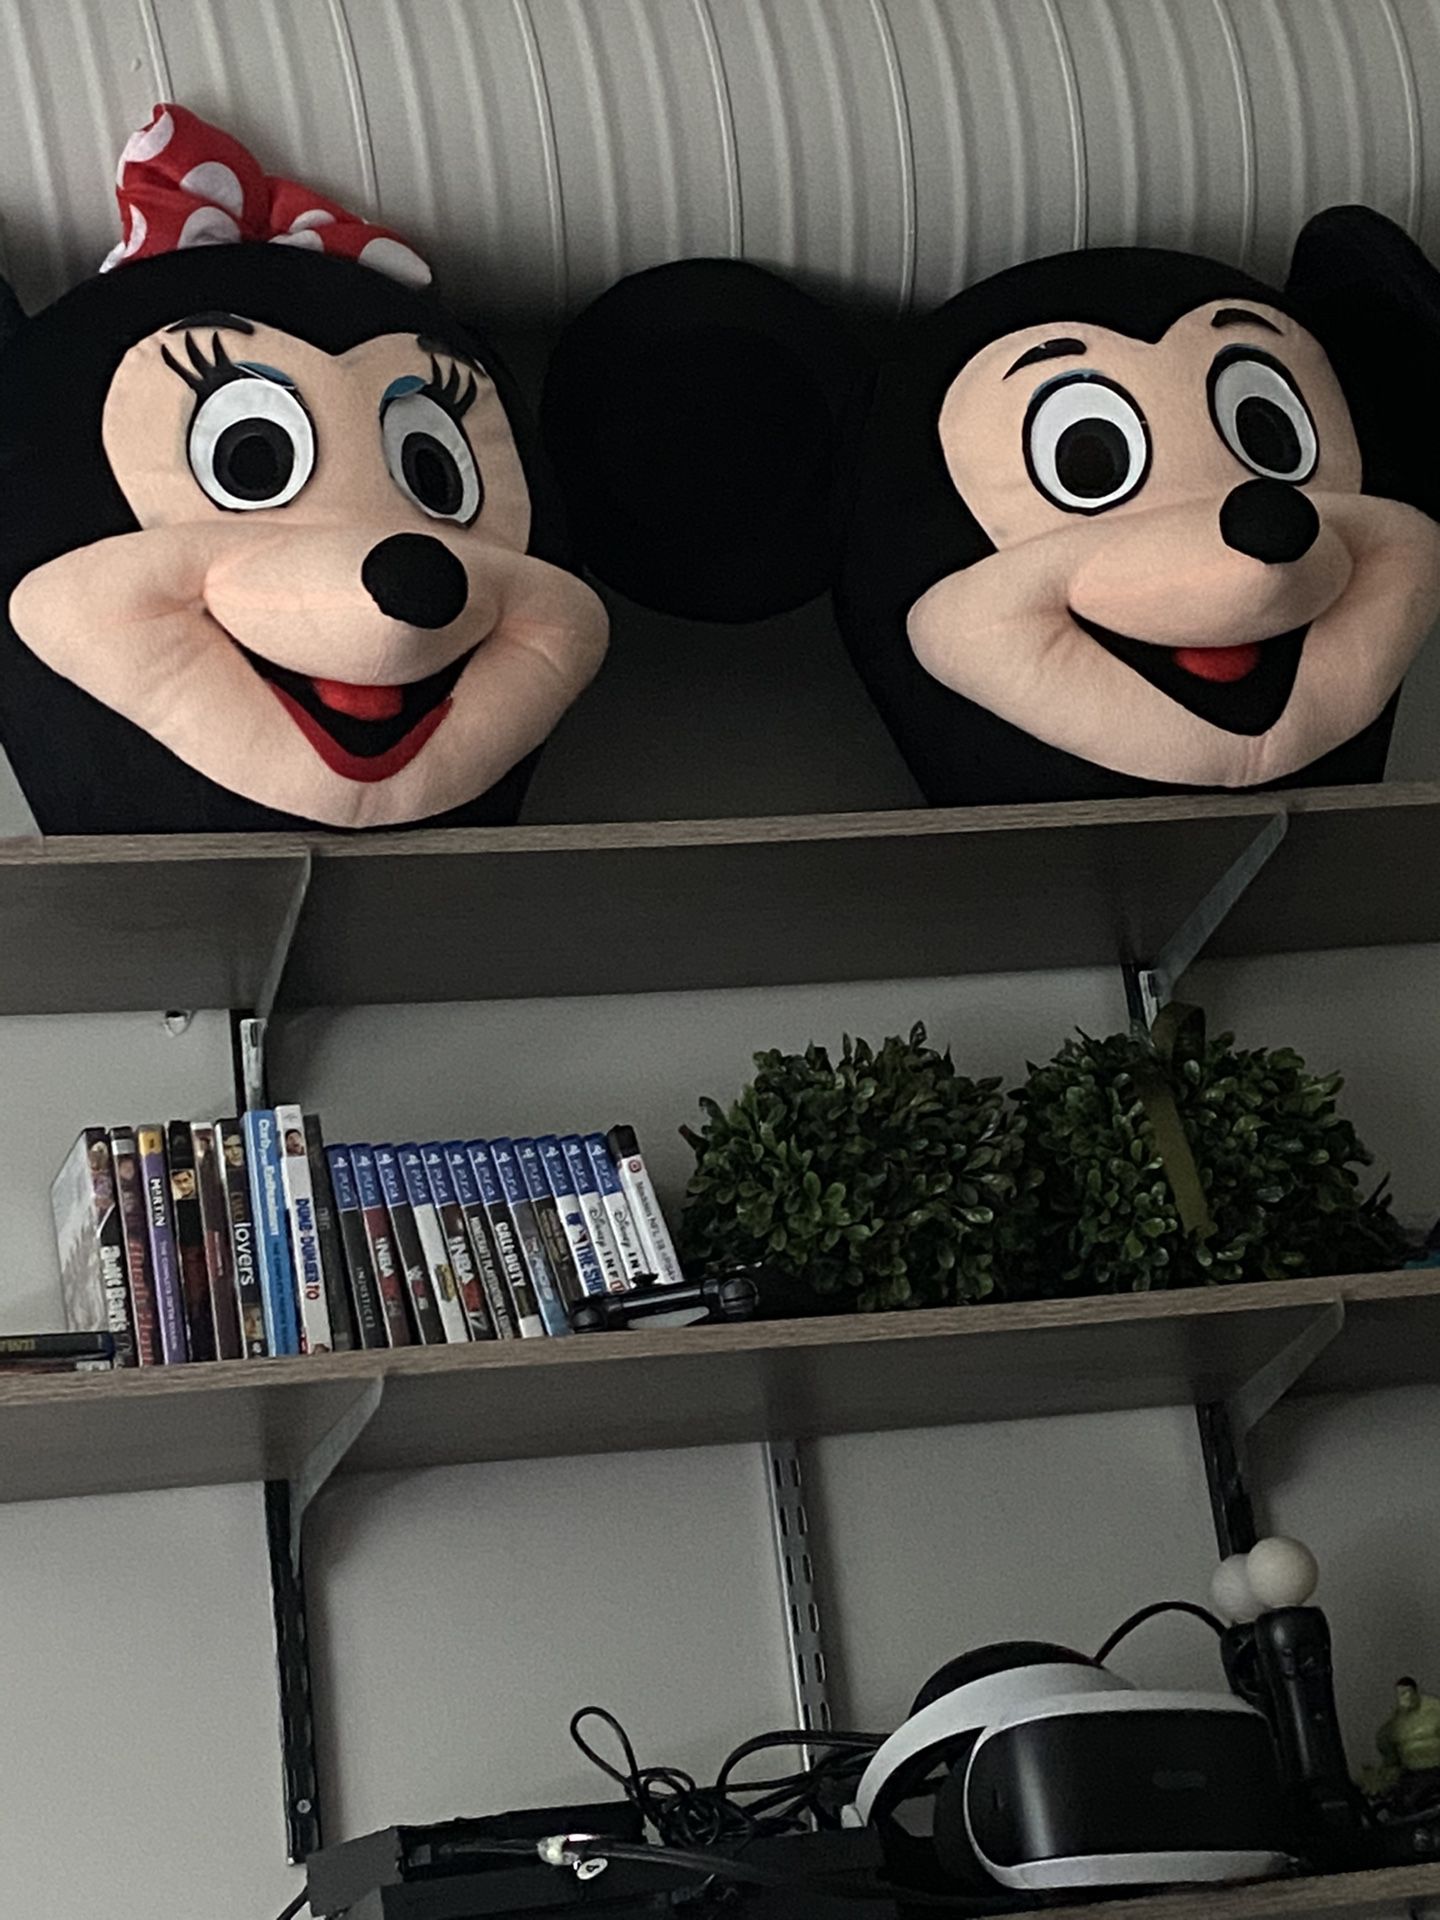 Mickey and Minnie Mouse costumes